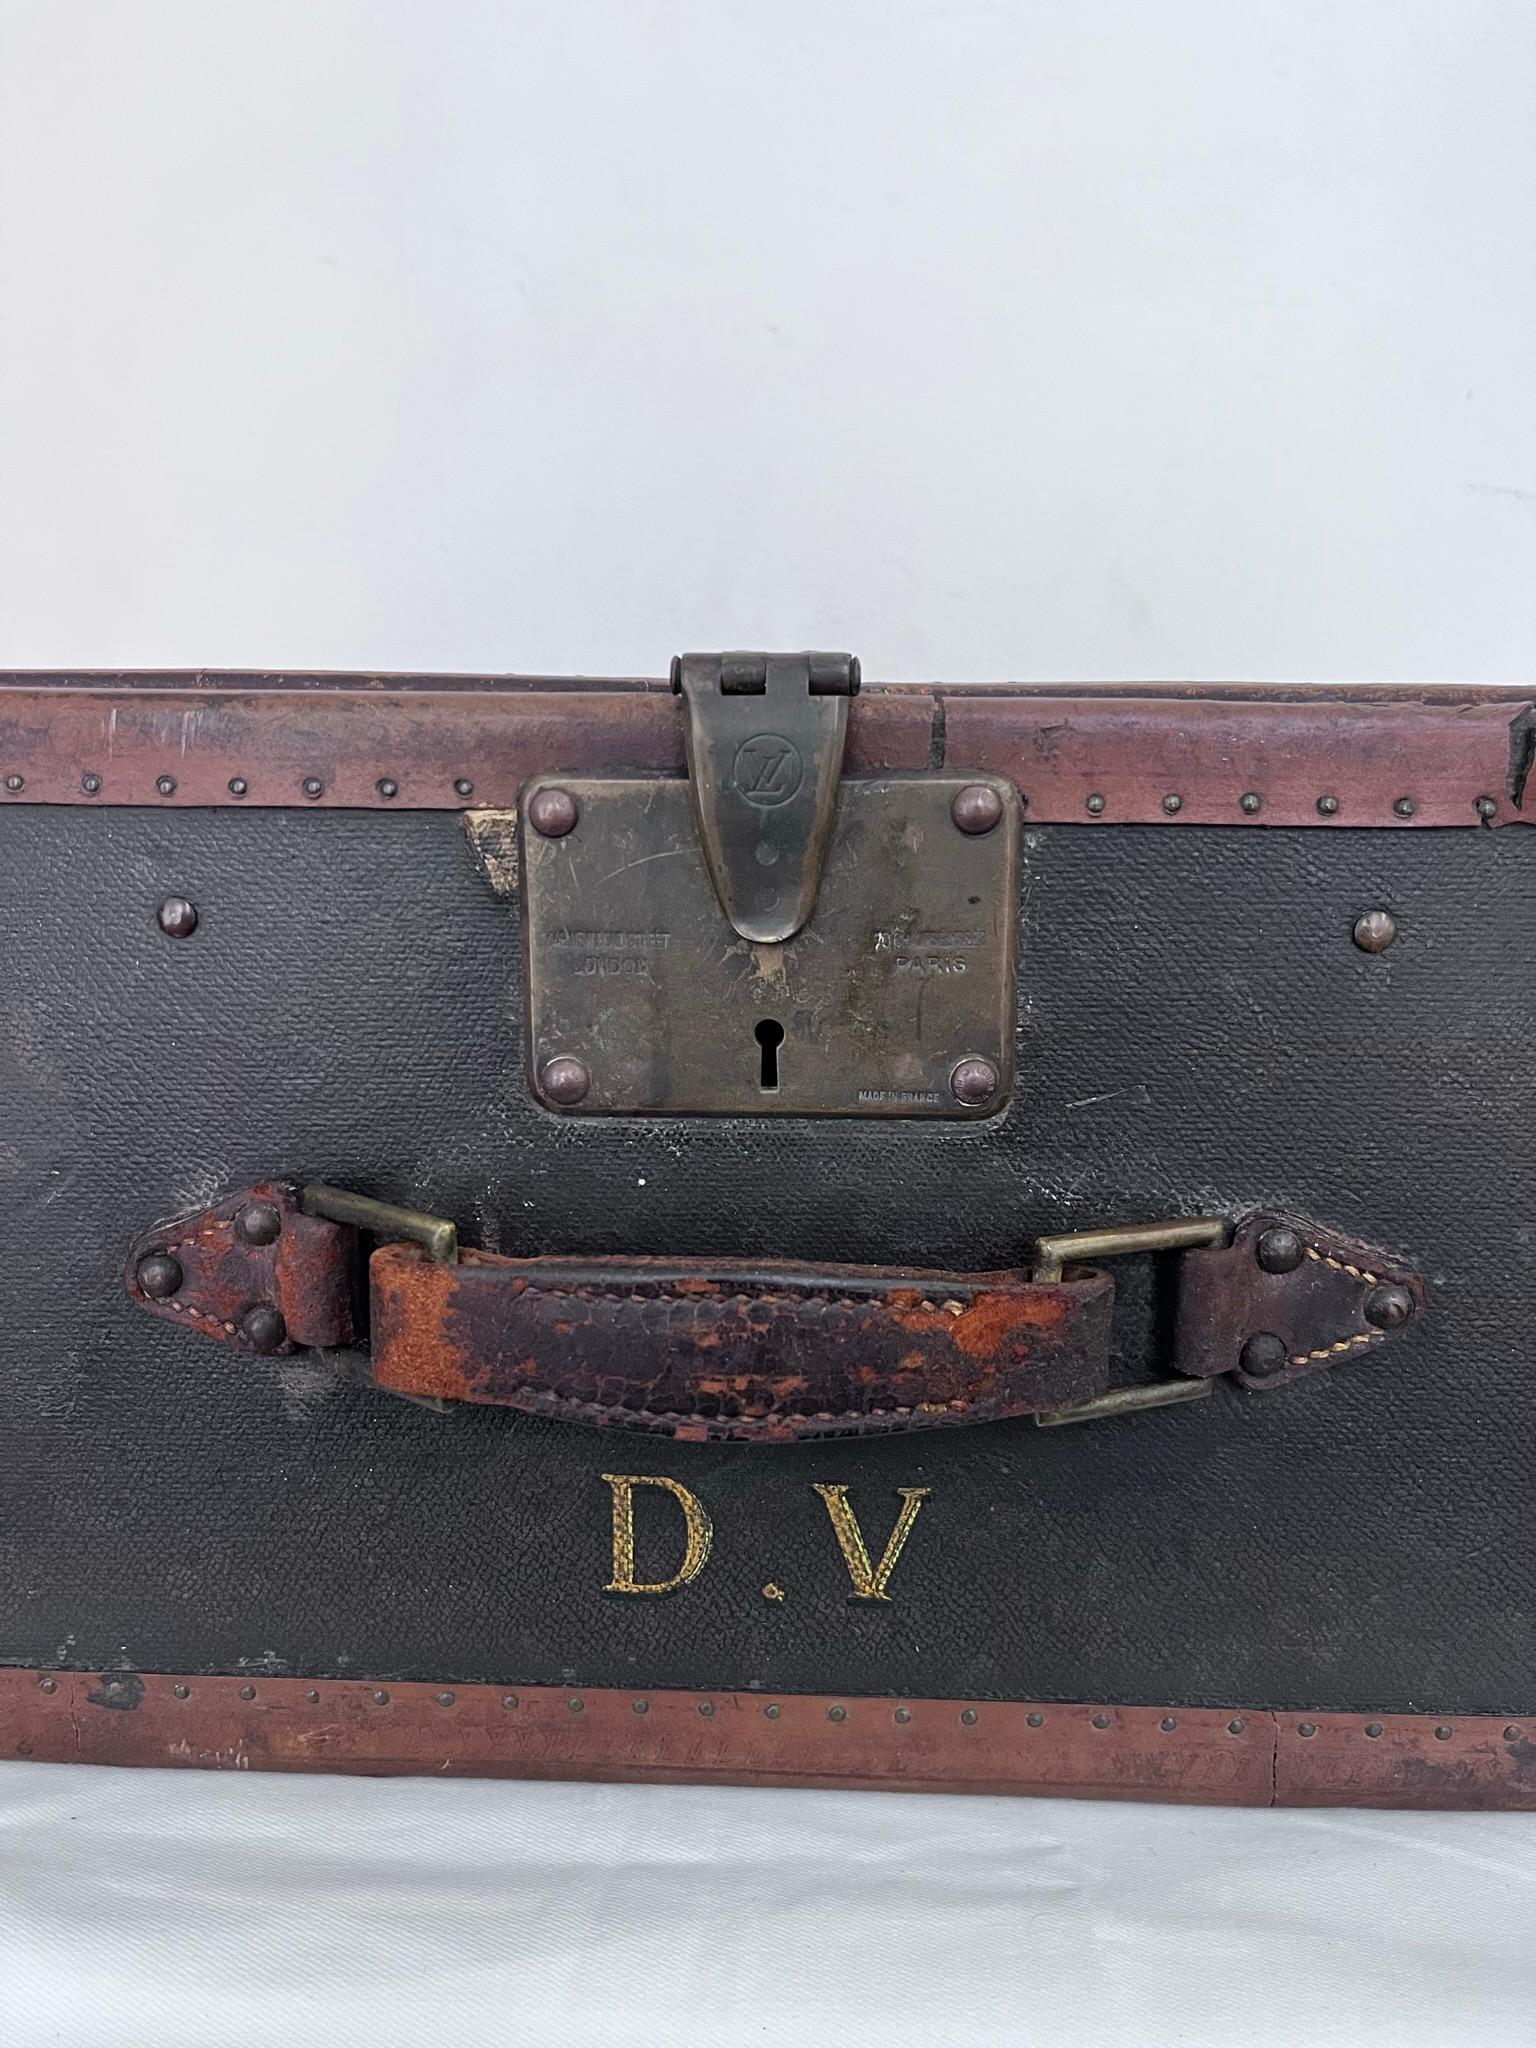 An extremely rare, unseen before and special order at the time it was made. The item doesn't come up in any books or research about the company about cases or trunks they made. 
As per Louis Vuitton this is a 